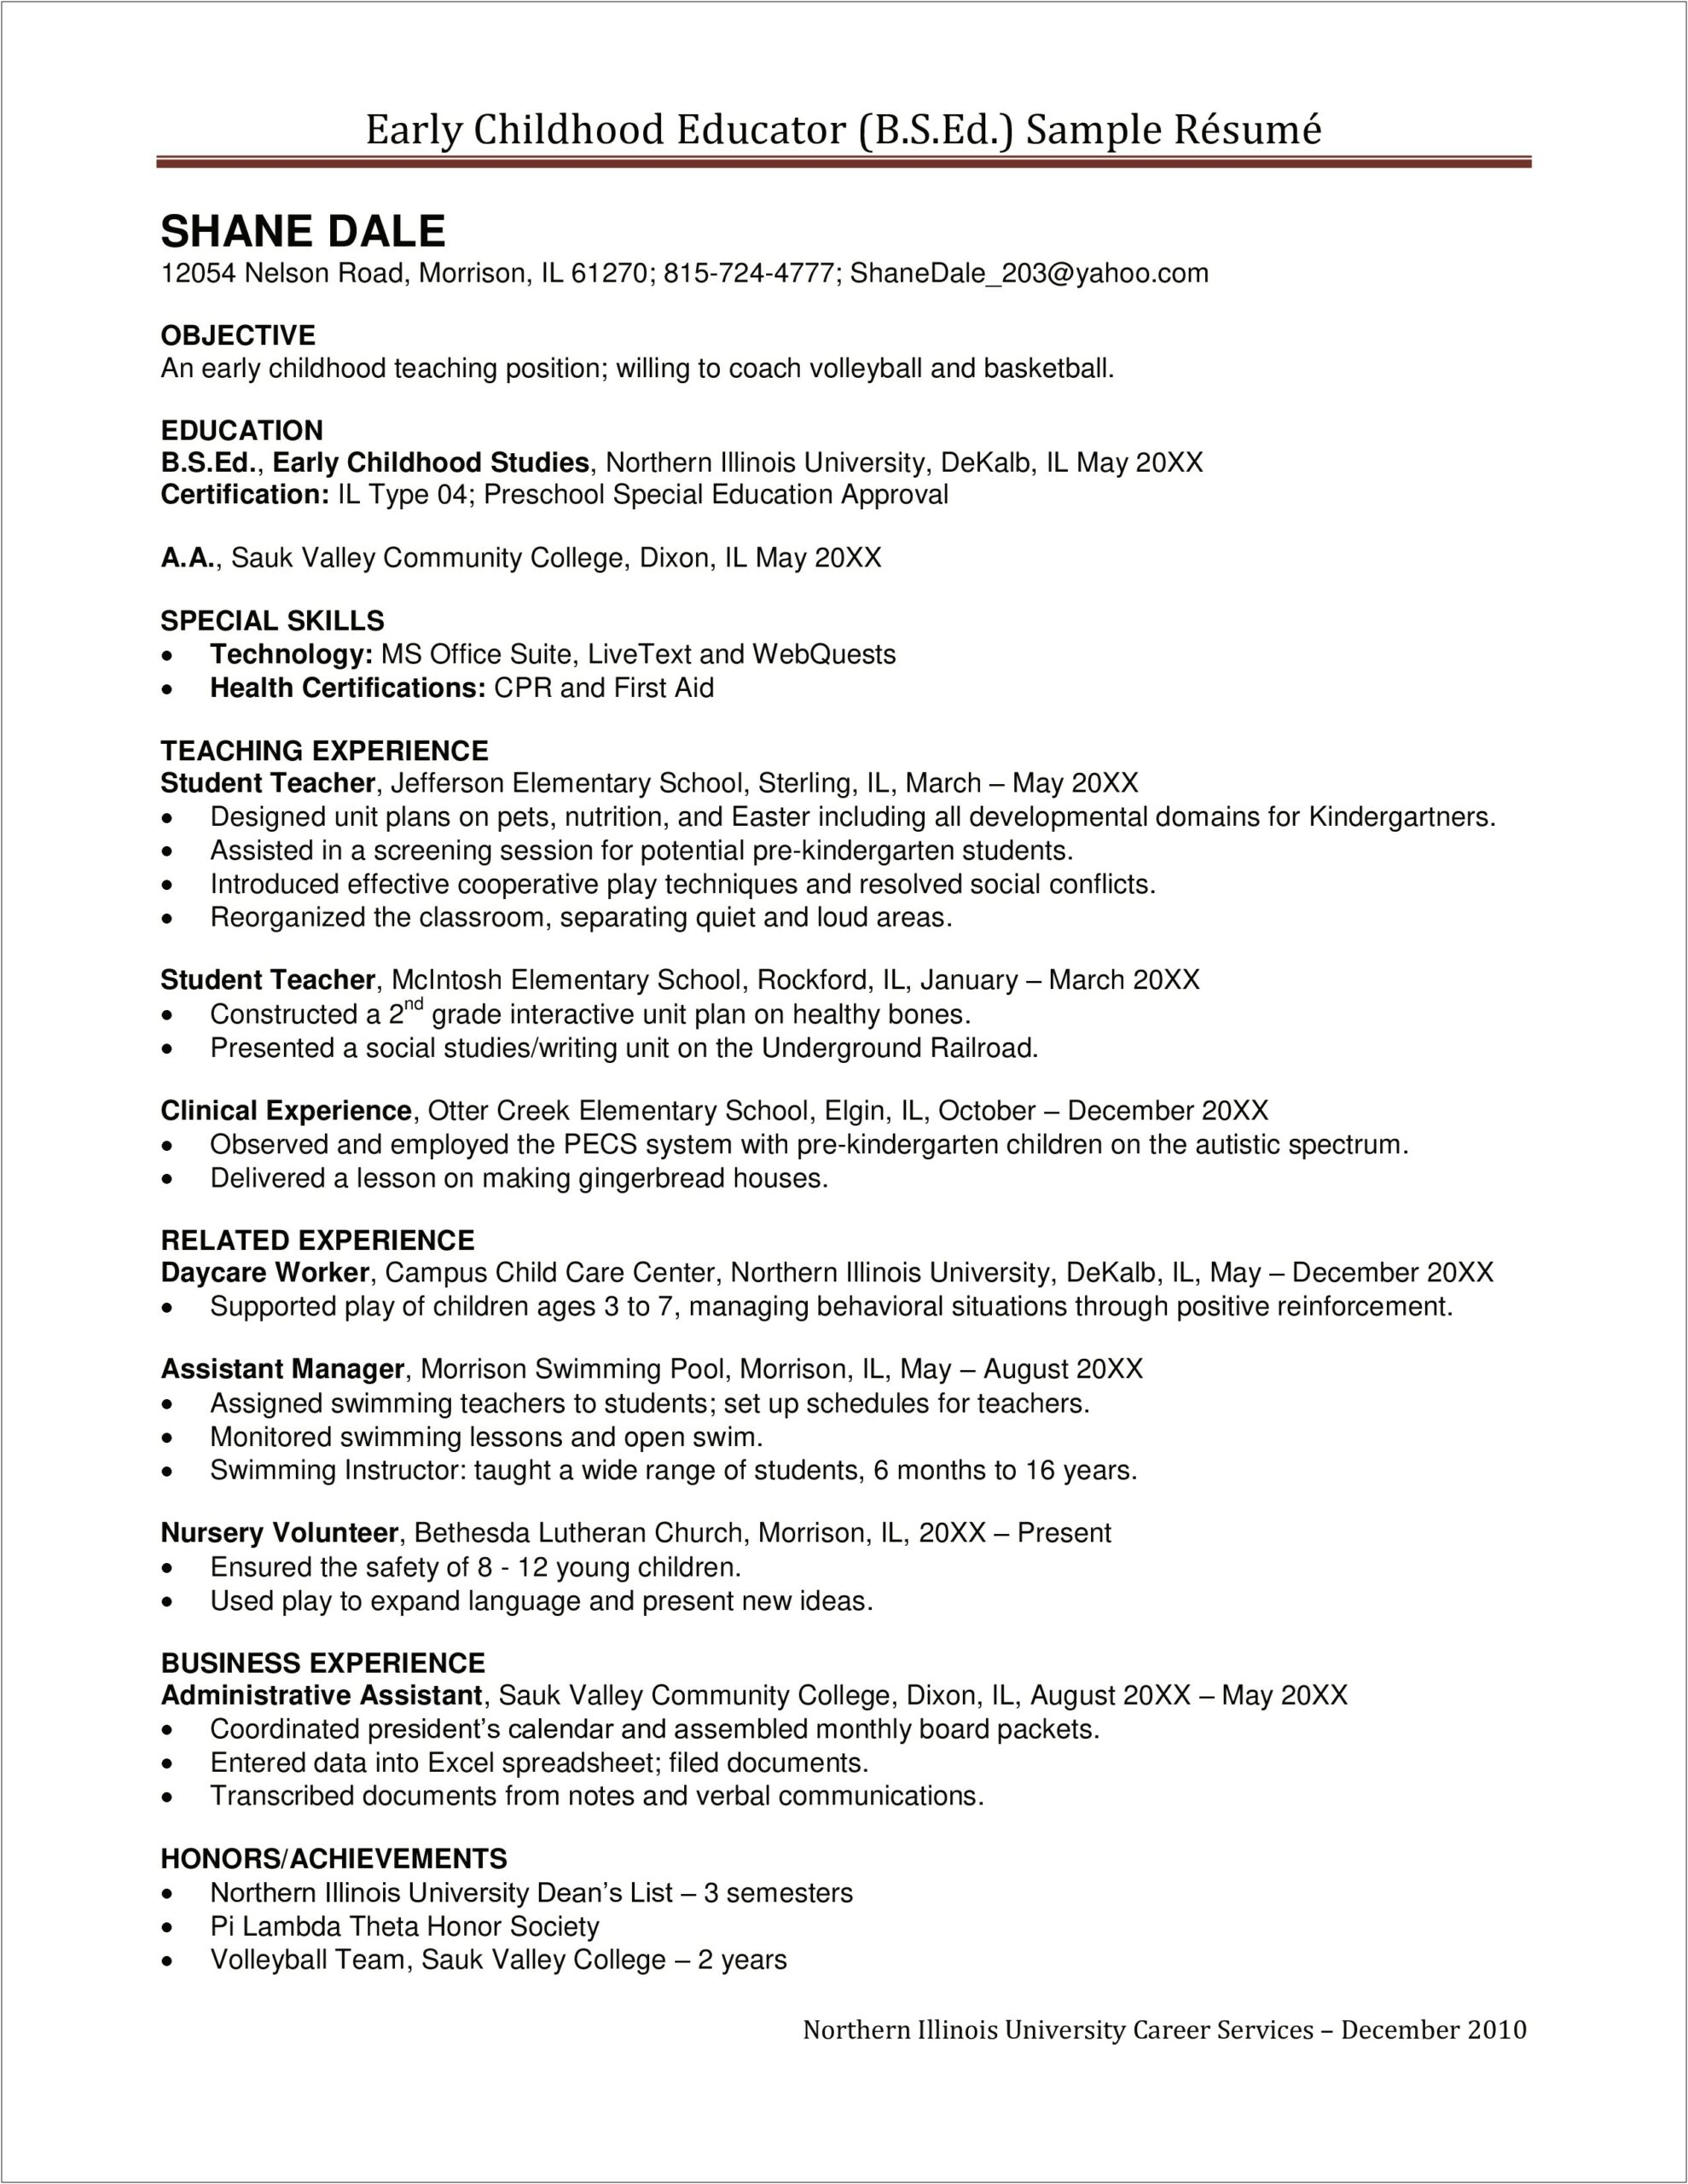 Where Should I Put Teaching Assistant In Resume